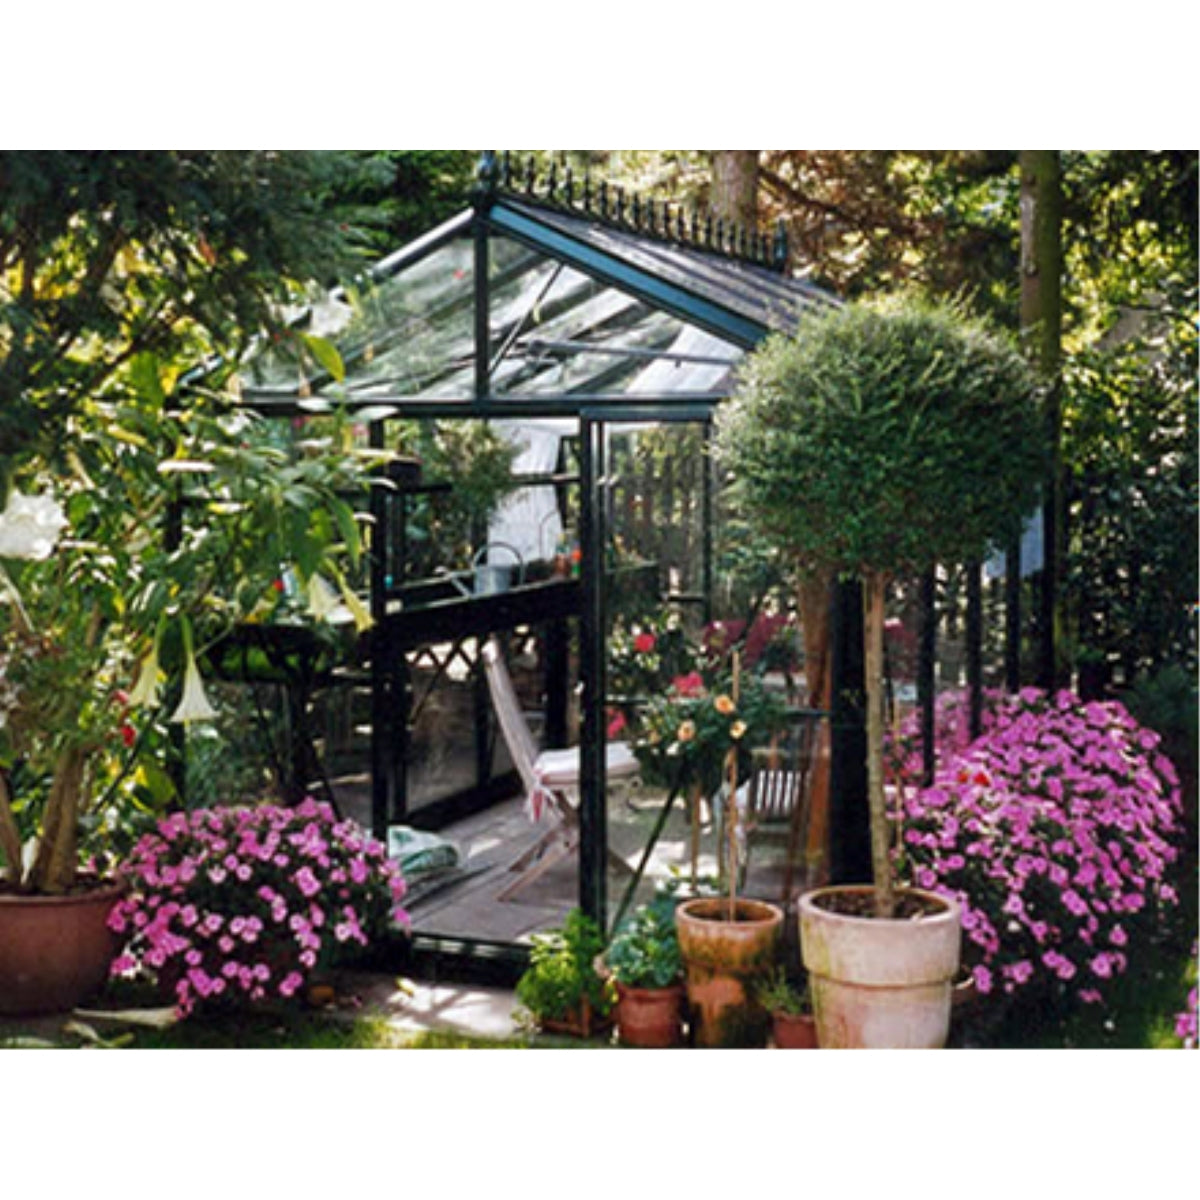 Janssens | 8x10x8.5 ft Royal Victorian VI 23 Small Glass Greenhouse Kit With 4mm Tempered Glass Glazing